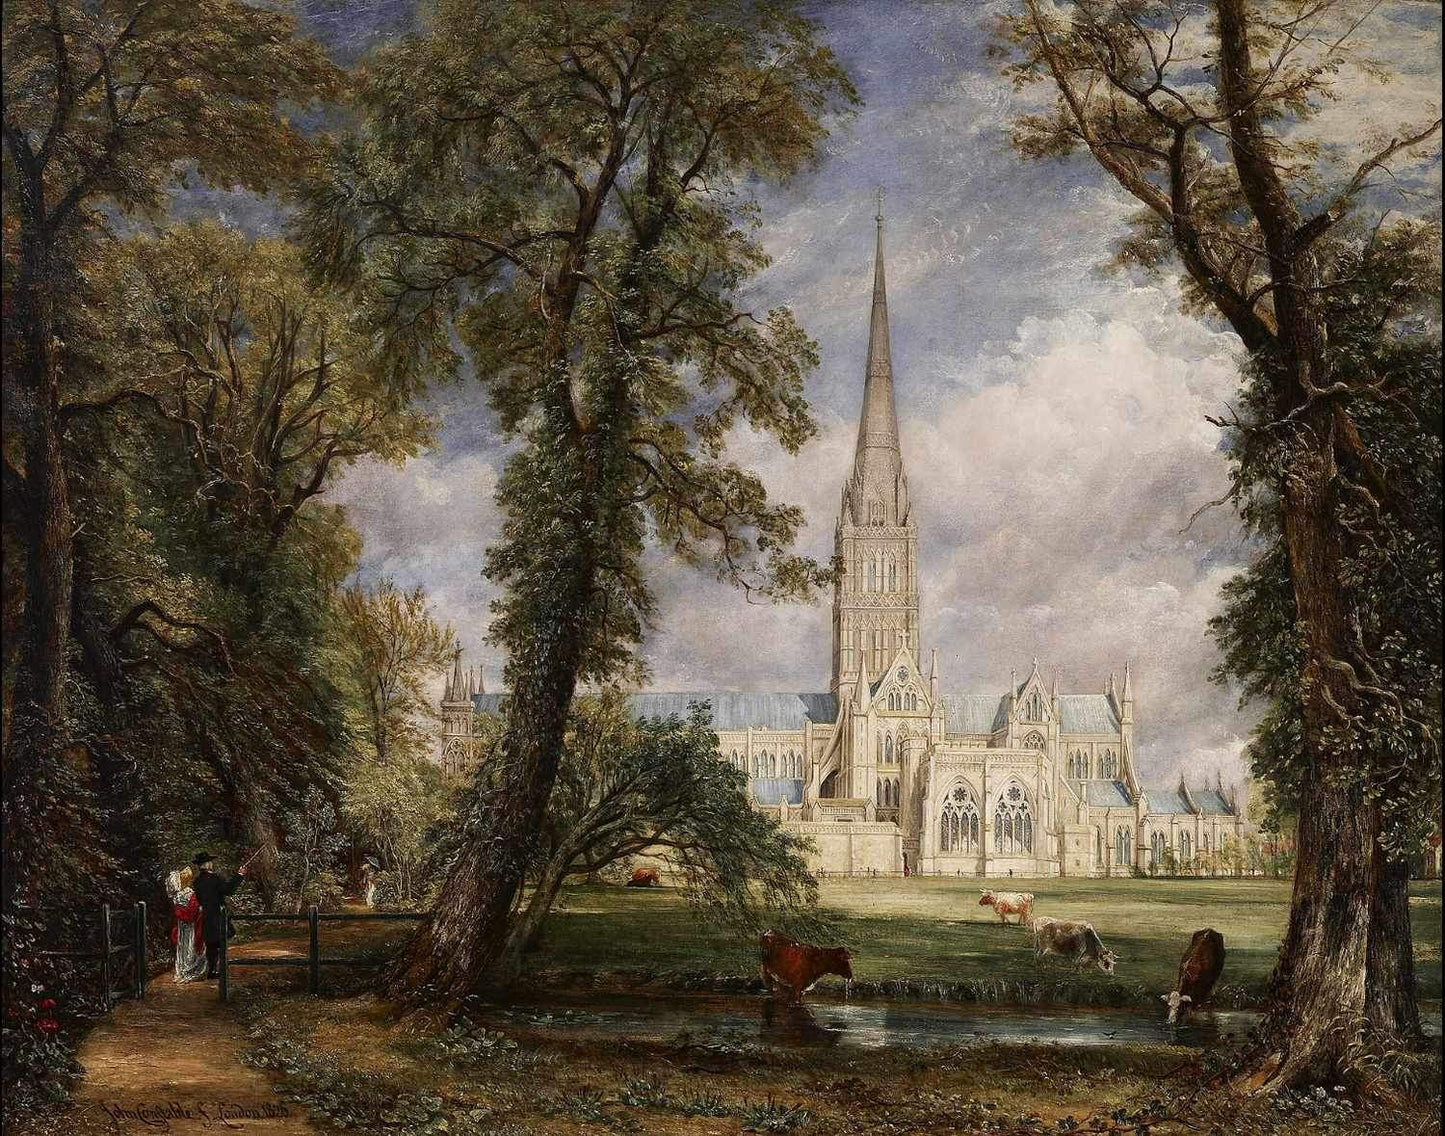 Salisbury Cathedral from Bishop's Grounds, John Constable